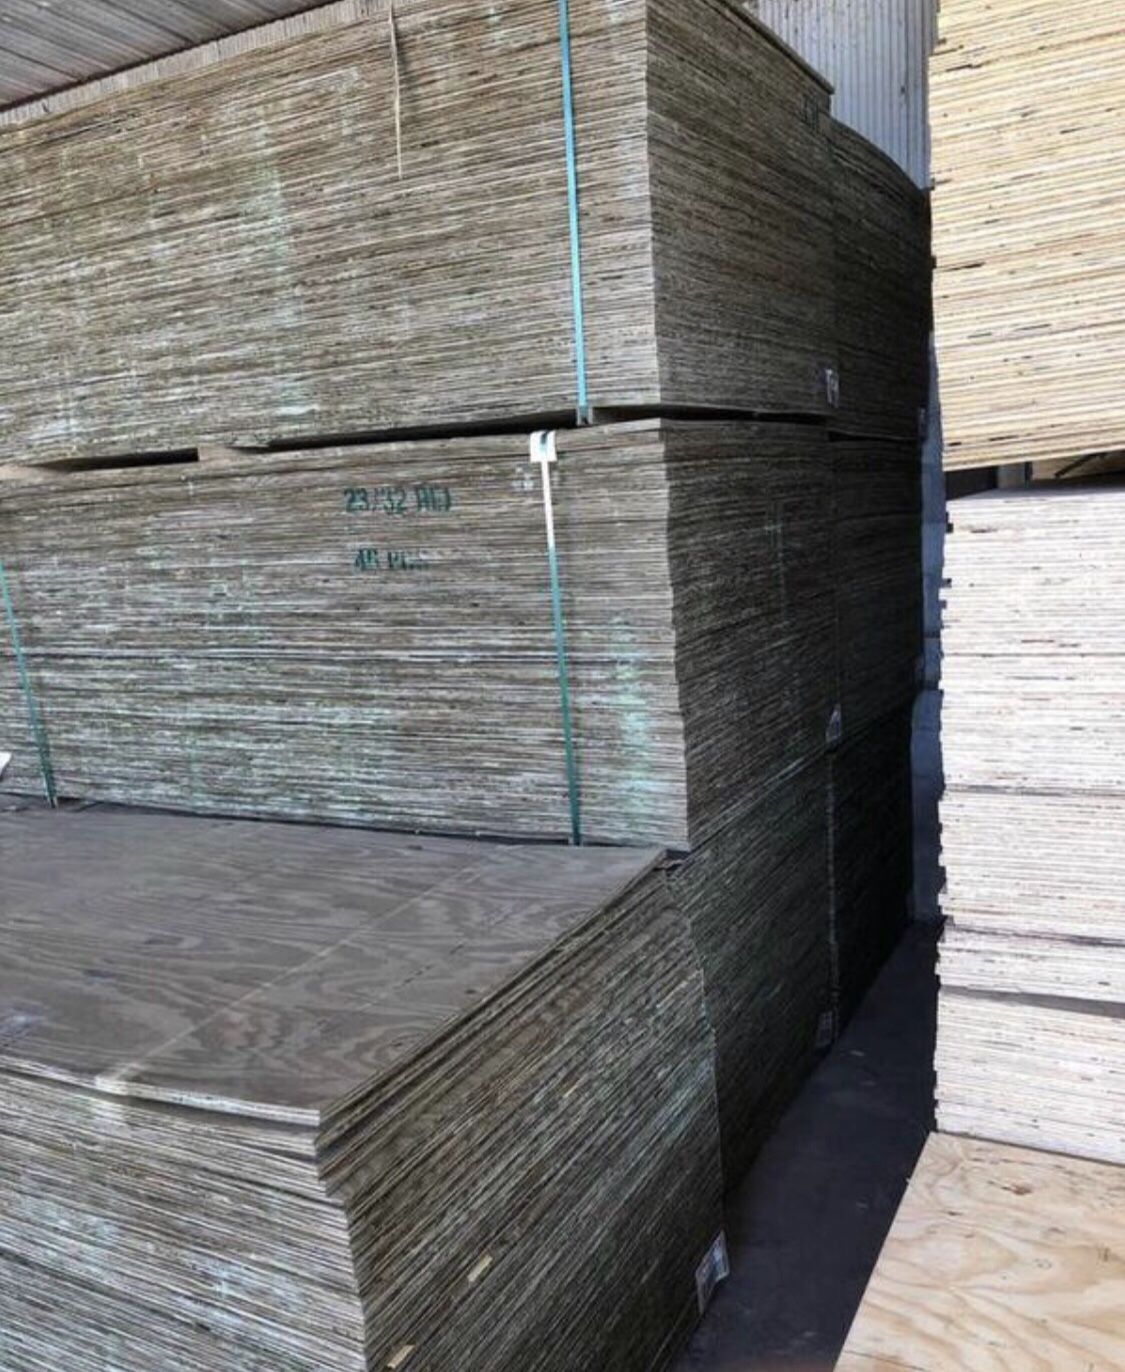 Pressure Treated Plywood - 3/4x4x8 PT - 5 Ply - $32 each